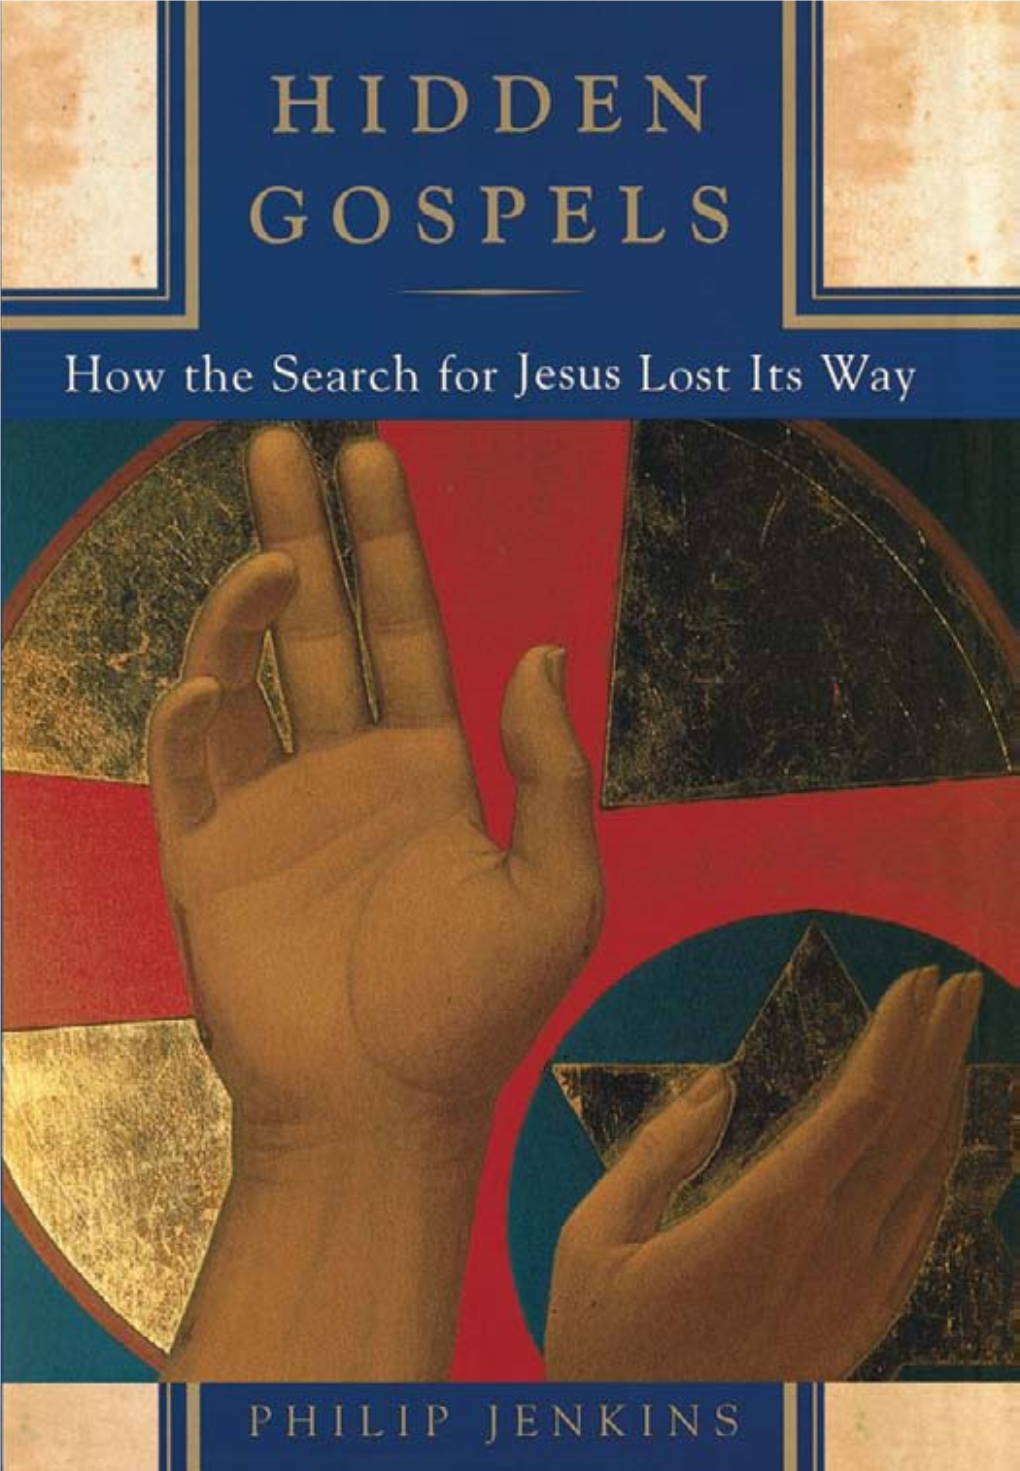 Hidden Gospels. How the Search for Jesus Lost Its